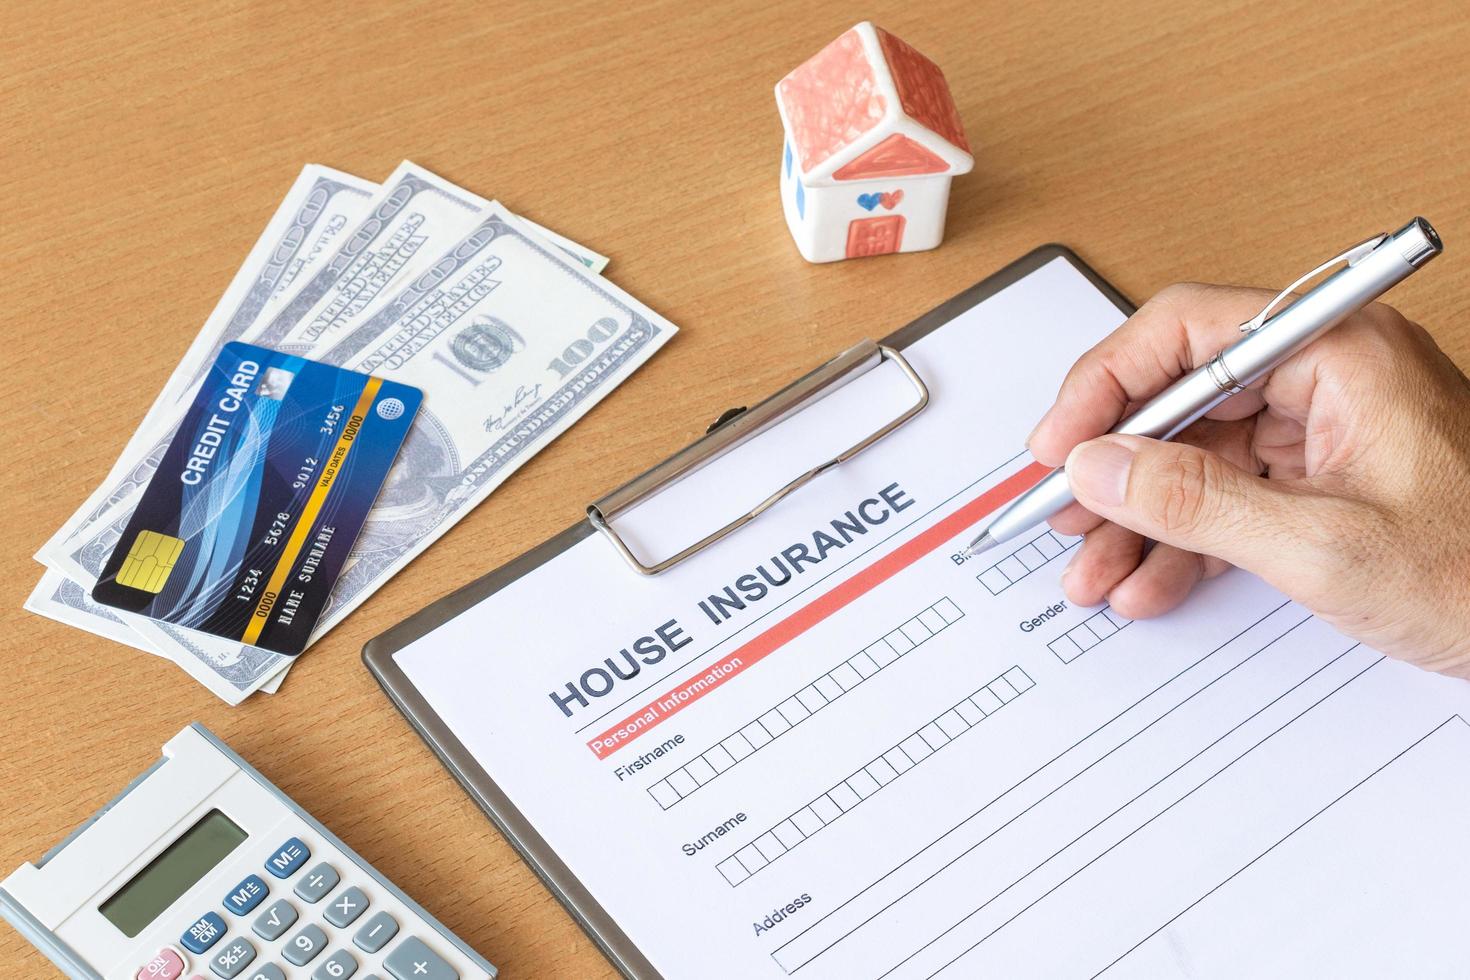 House insurance form with model and policy document photo